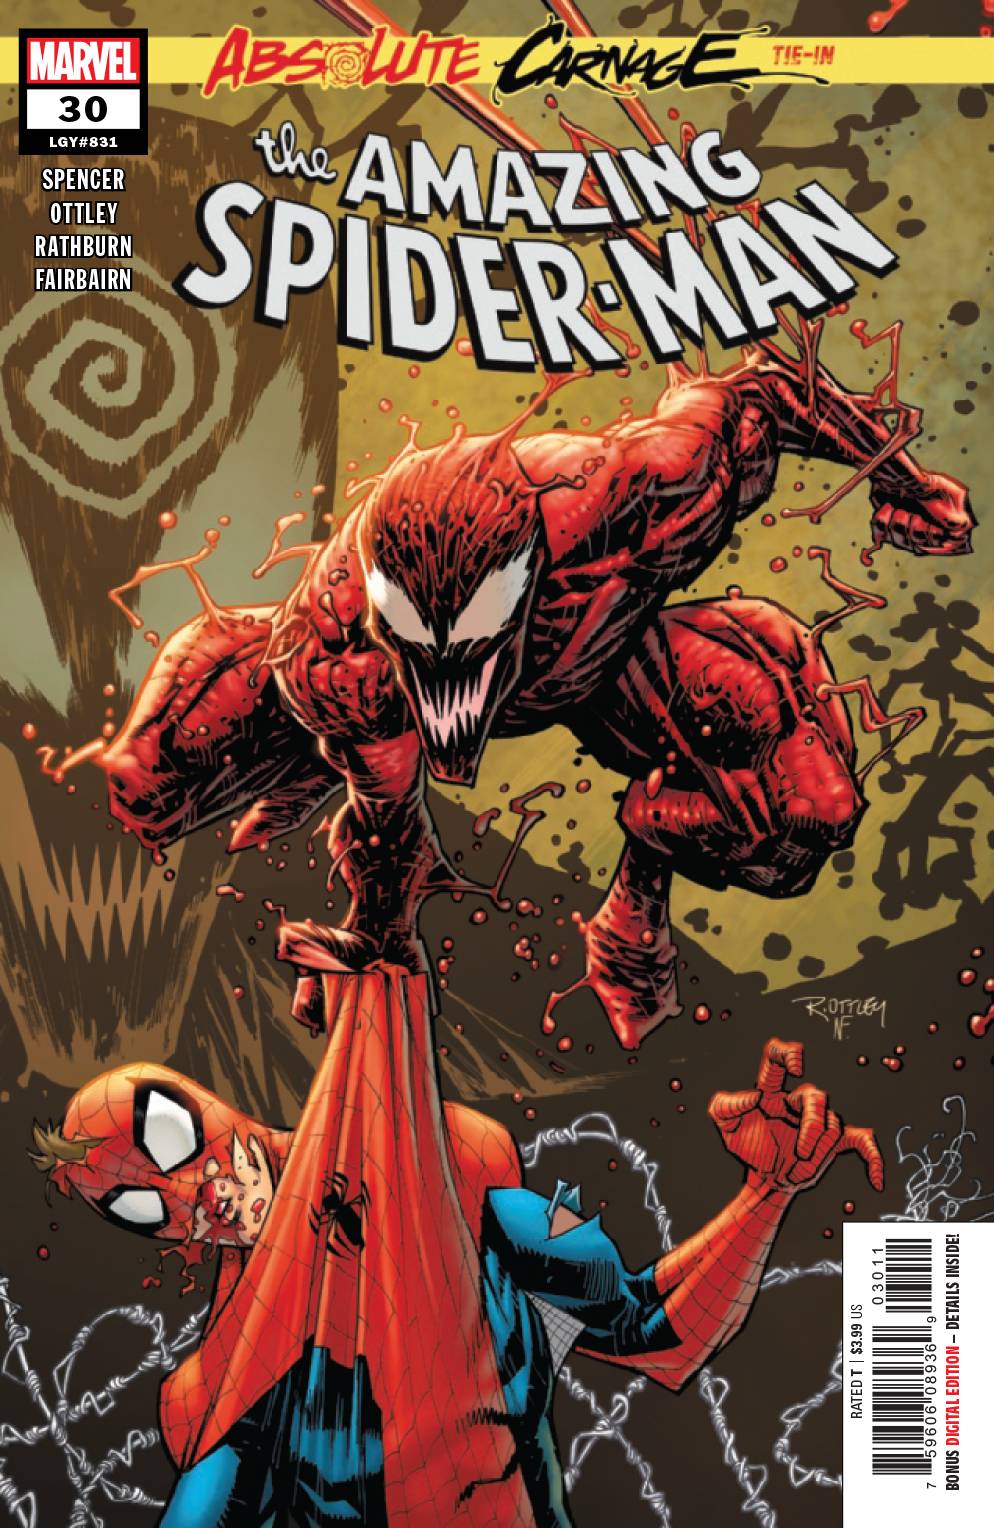 Amazing Spider-Man #30 Absolute Carnage (2018)